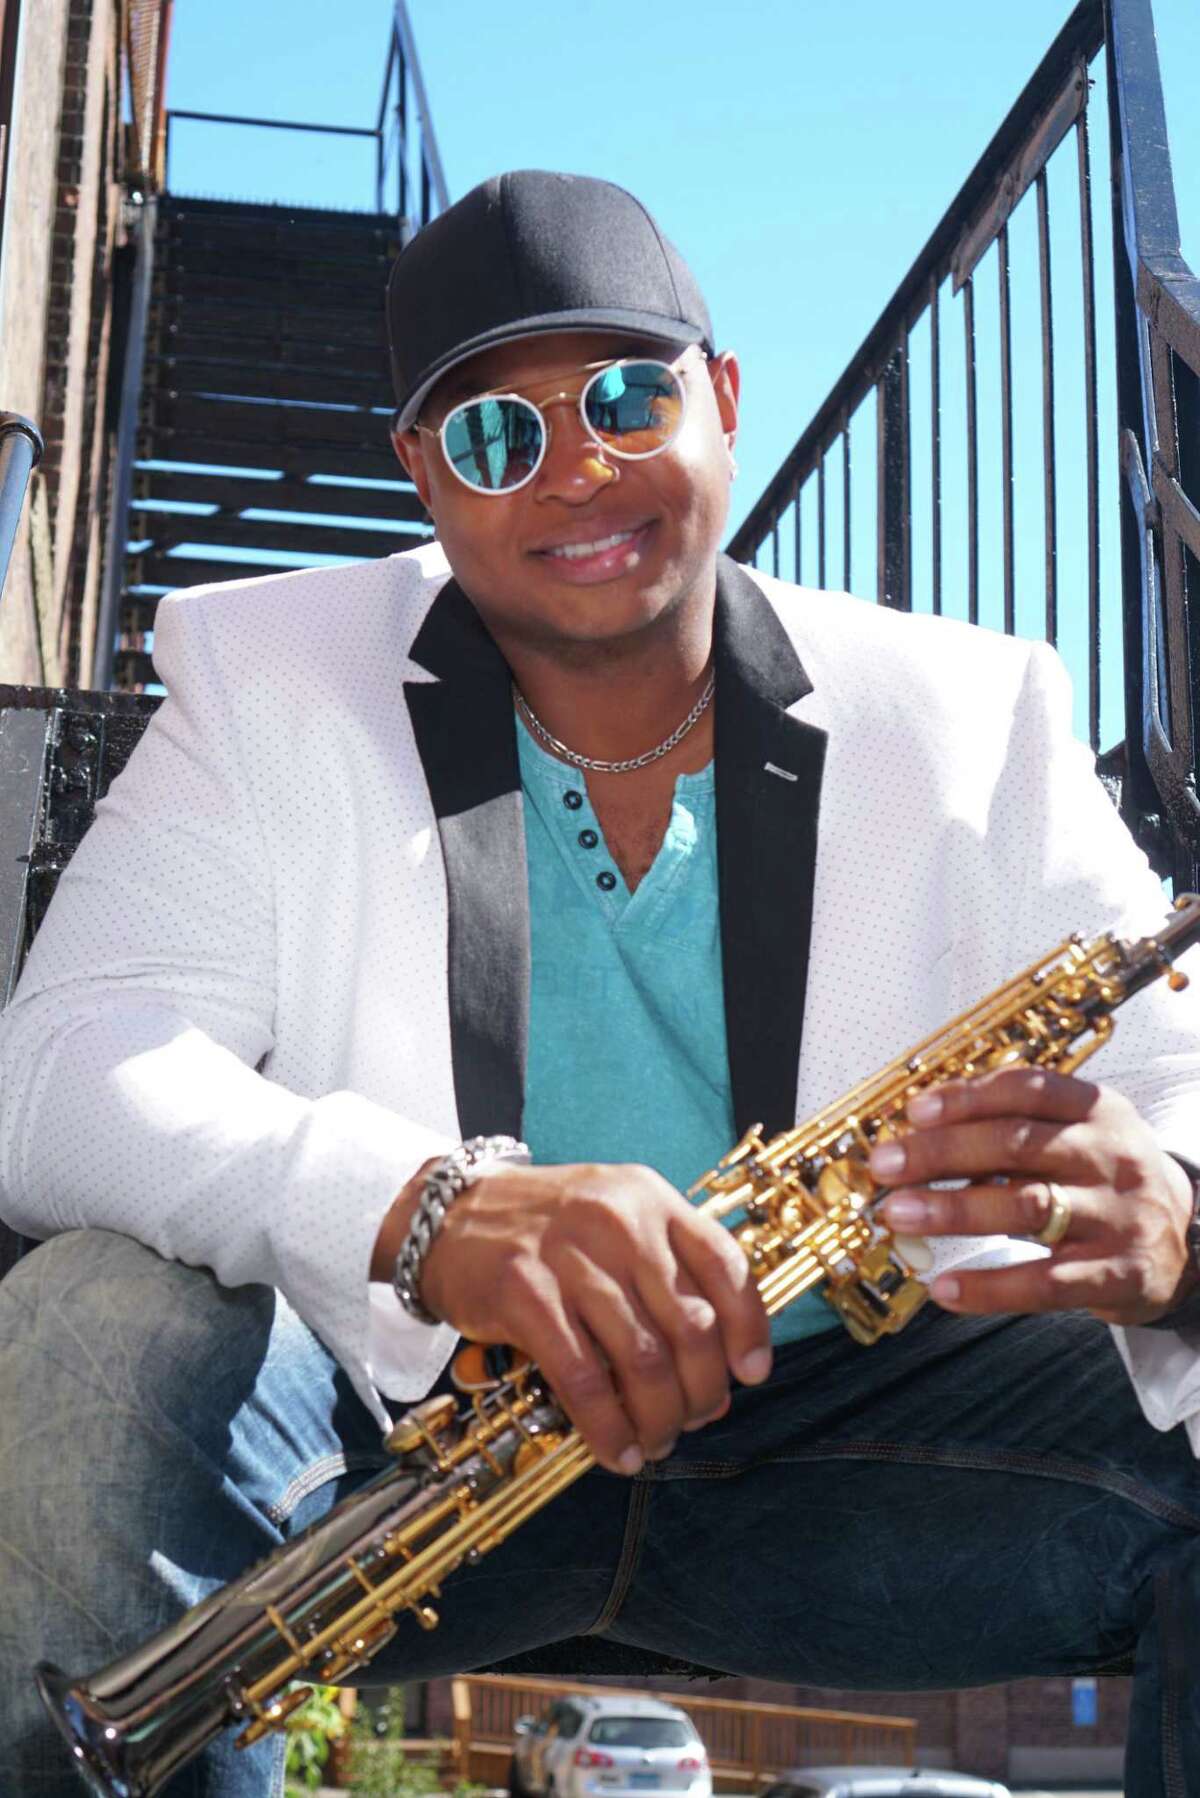 Jazz saxophonist David Davis, who grew up in Stamford, has a new CD out, “Dig This!,” which illustrates the diversity of the music he likes to explore.